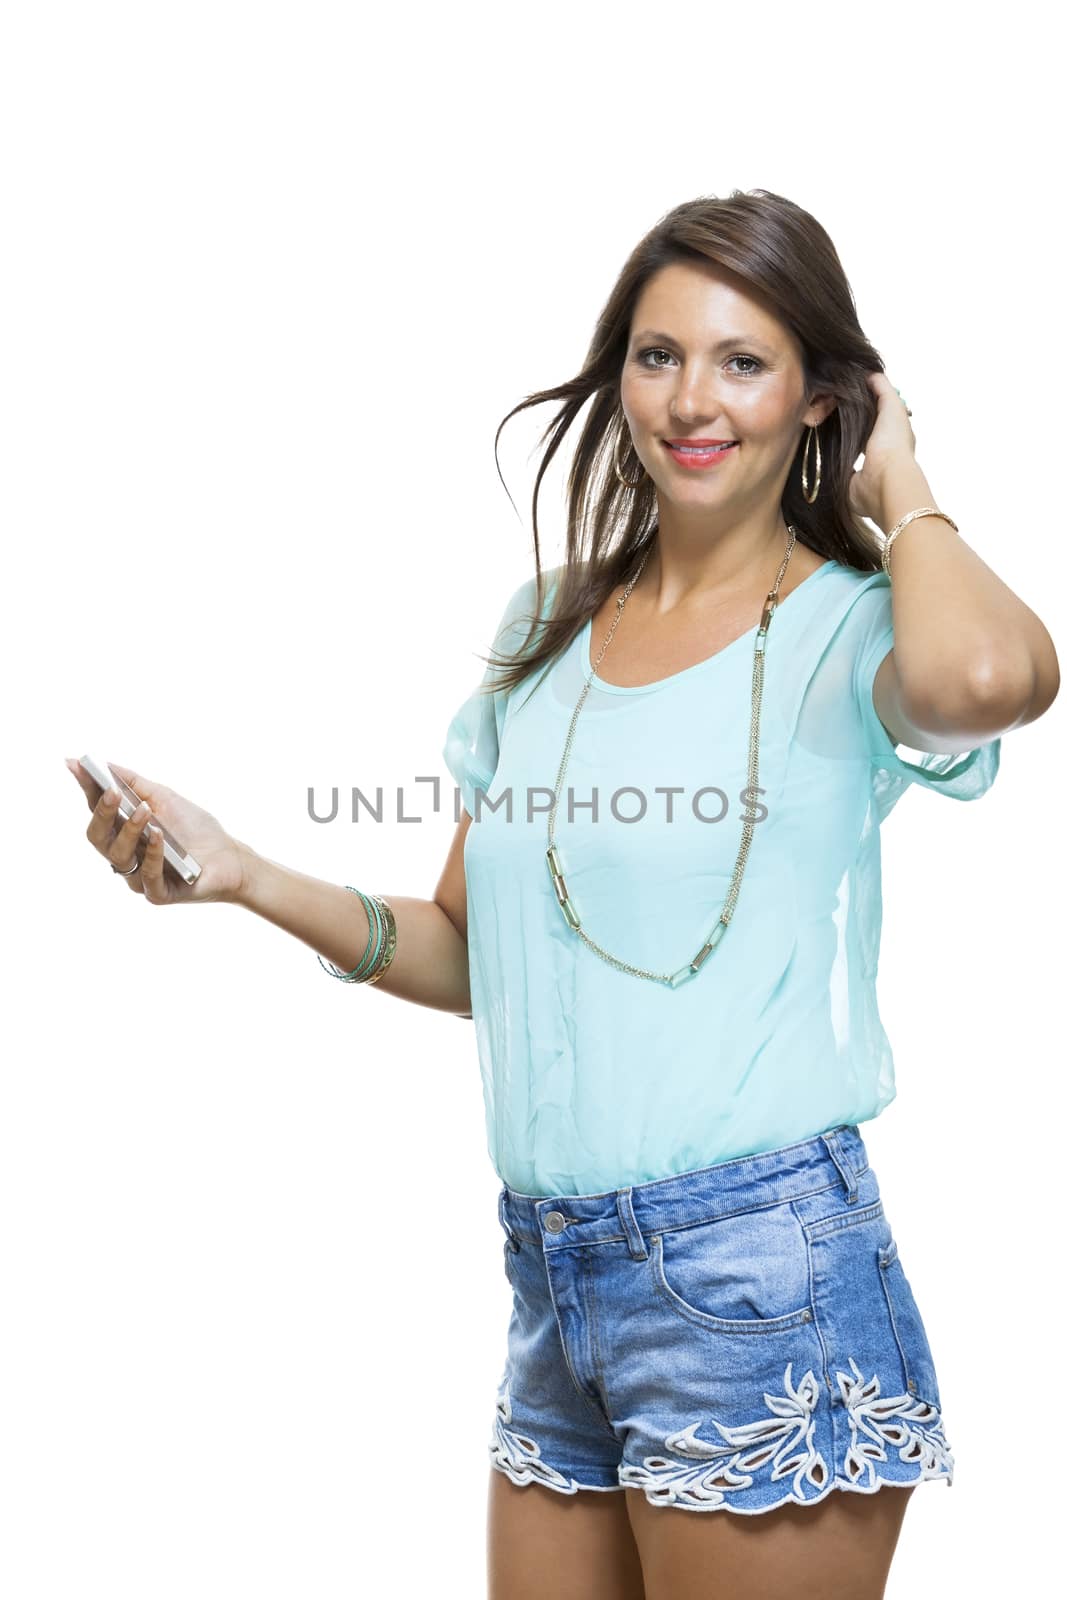 Pretty Happy Woman Holding a Mobile Phone by juniart